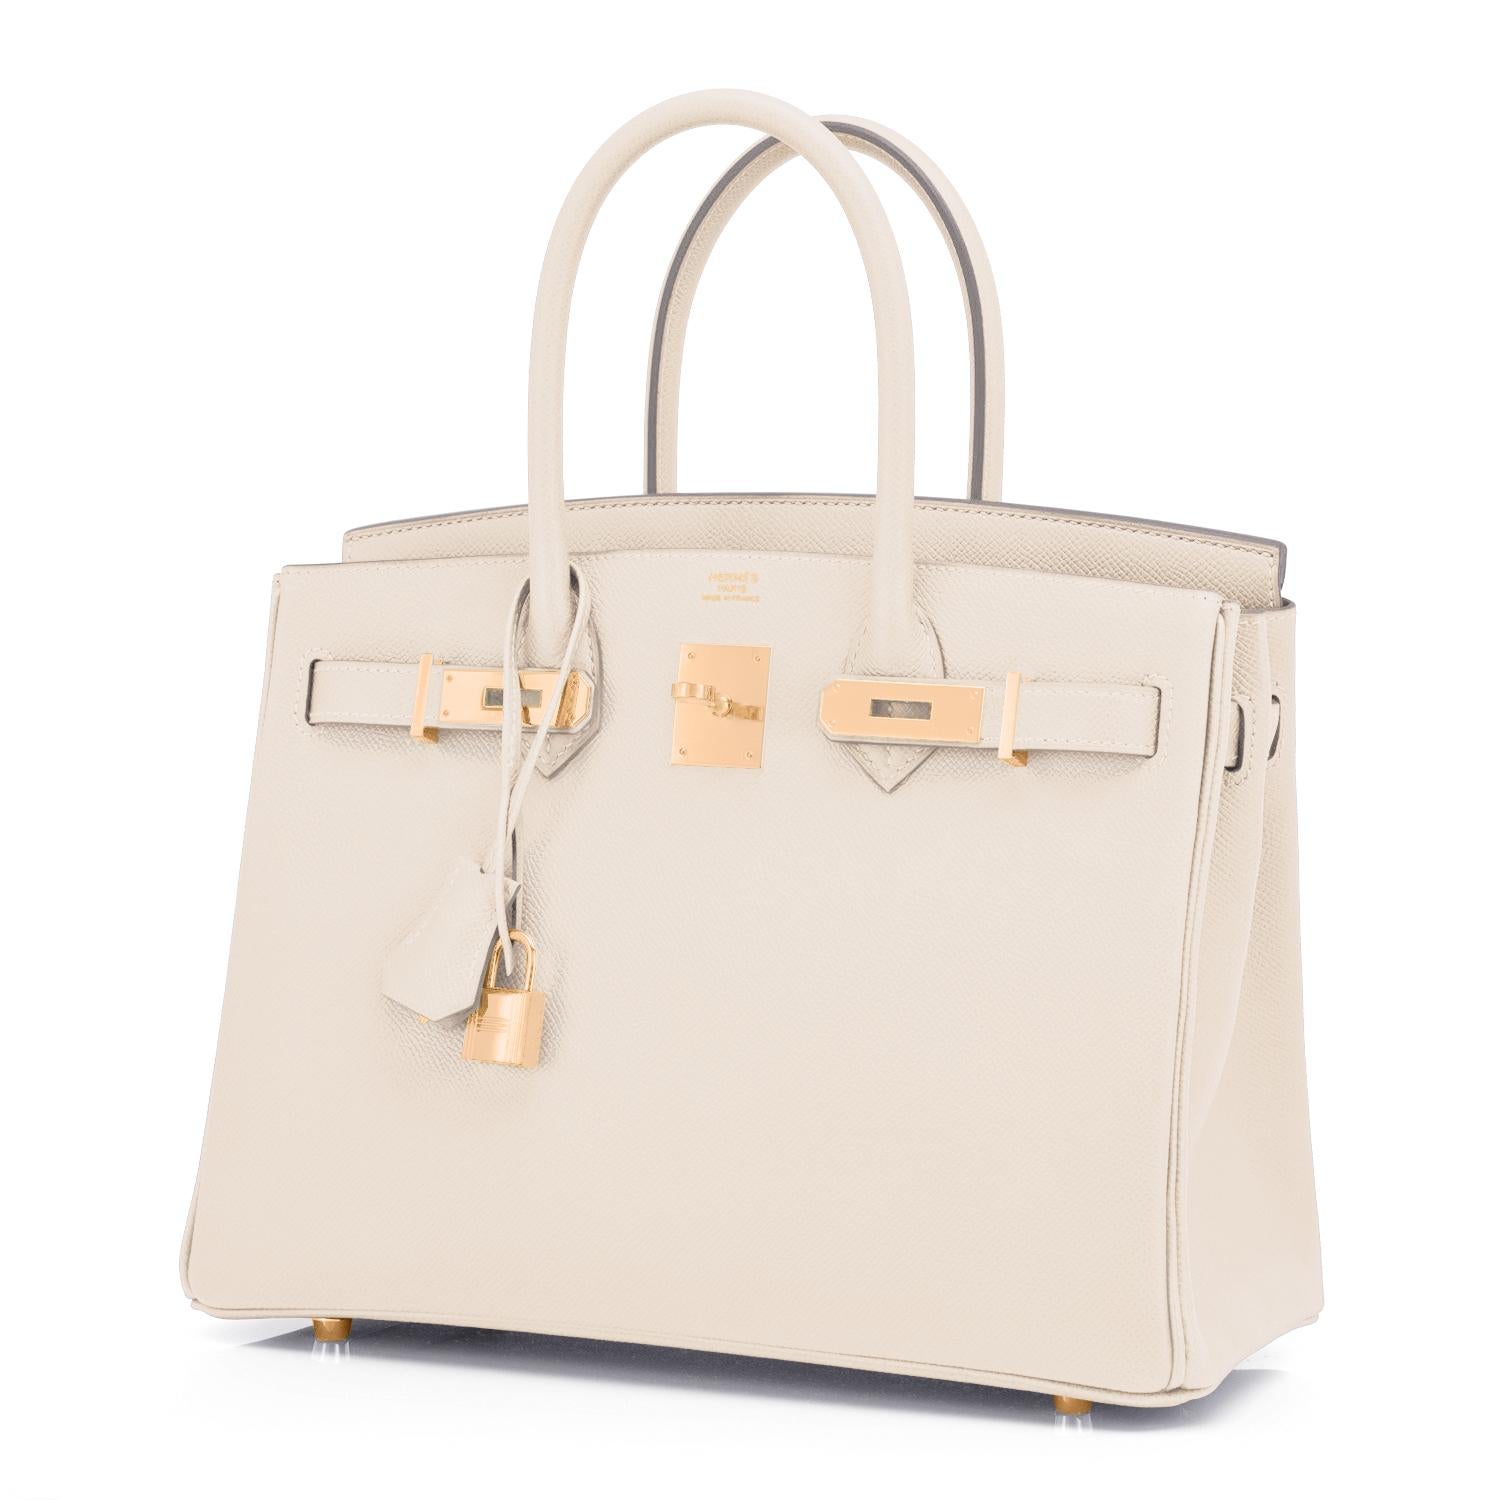 Hermes Birkin 30cm Craie Rose Gold Off White Epsom Bag Y Stamp, 2020
Don't miss this sublime and most wanted Craie and Rose Gold Hardware combination!
Brand New in Box. Store Fresh. Pristine Condition (with plastic on hardware)
The hottest color of